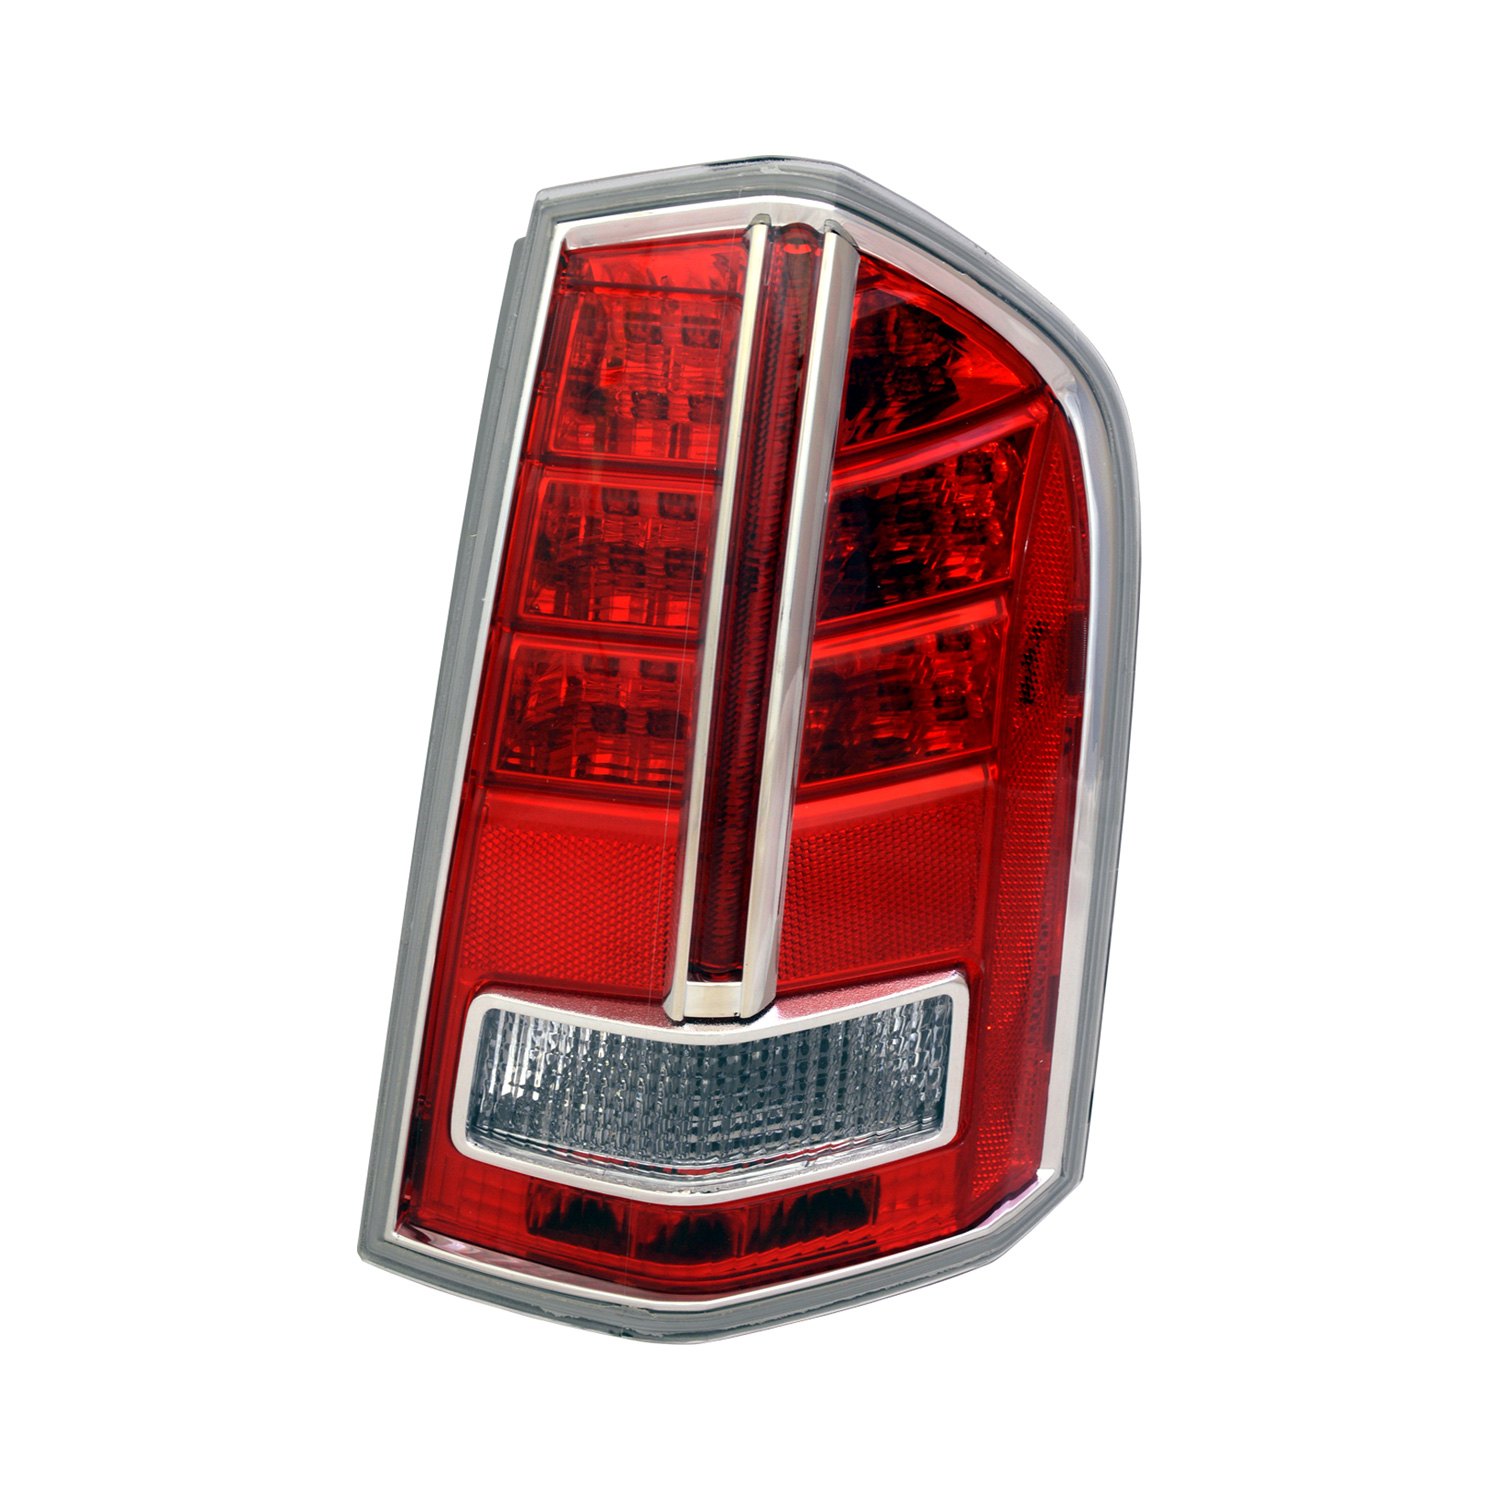 Depo 323-1901R-AS Kia Sephia Passenger Side Replacement Taillight Assembly